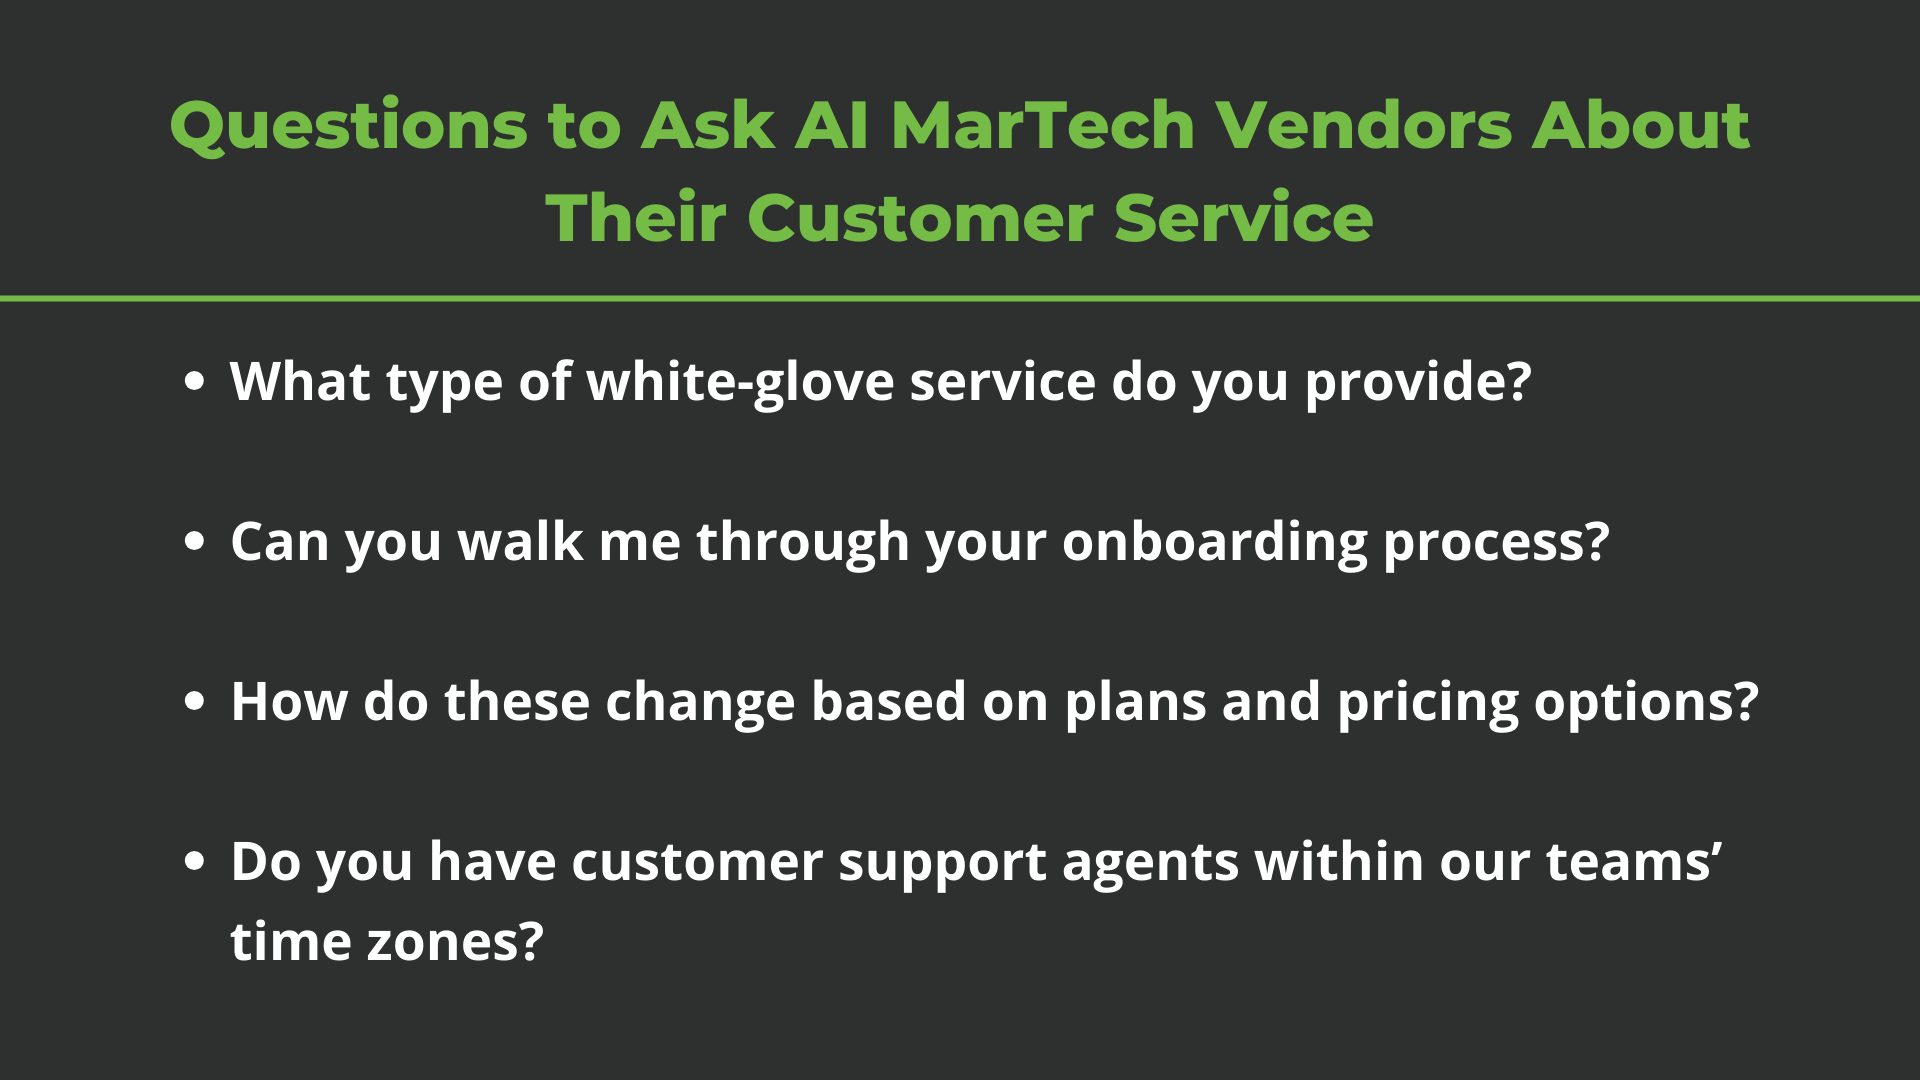 Black background with a green heading and white bullet point text listing questions to ask a martech vendor